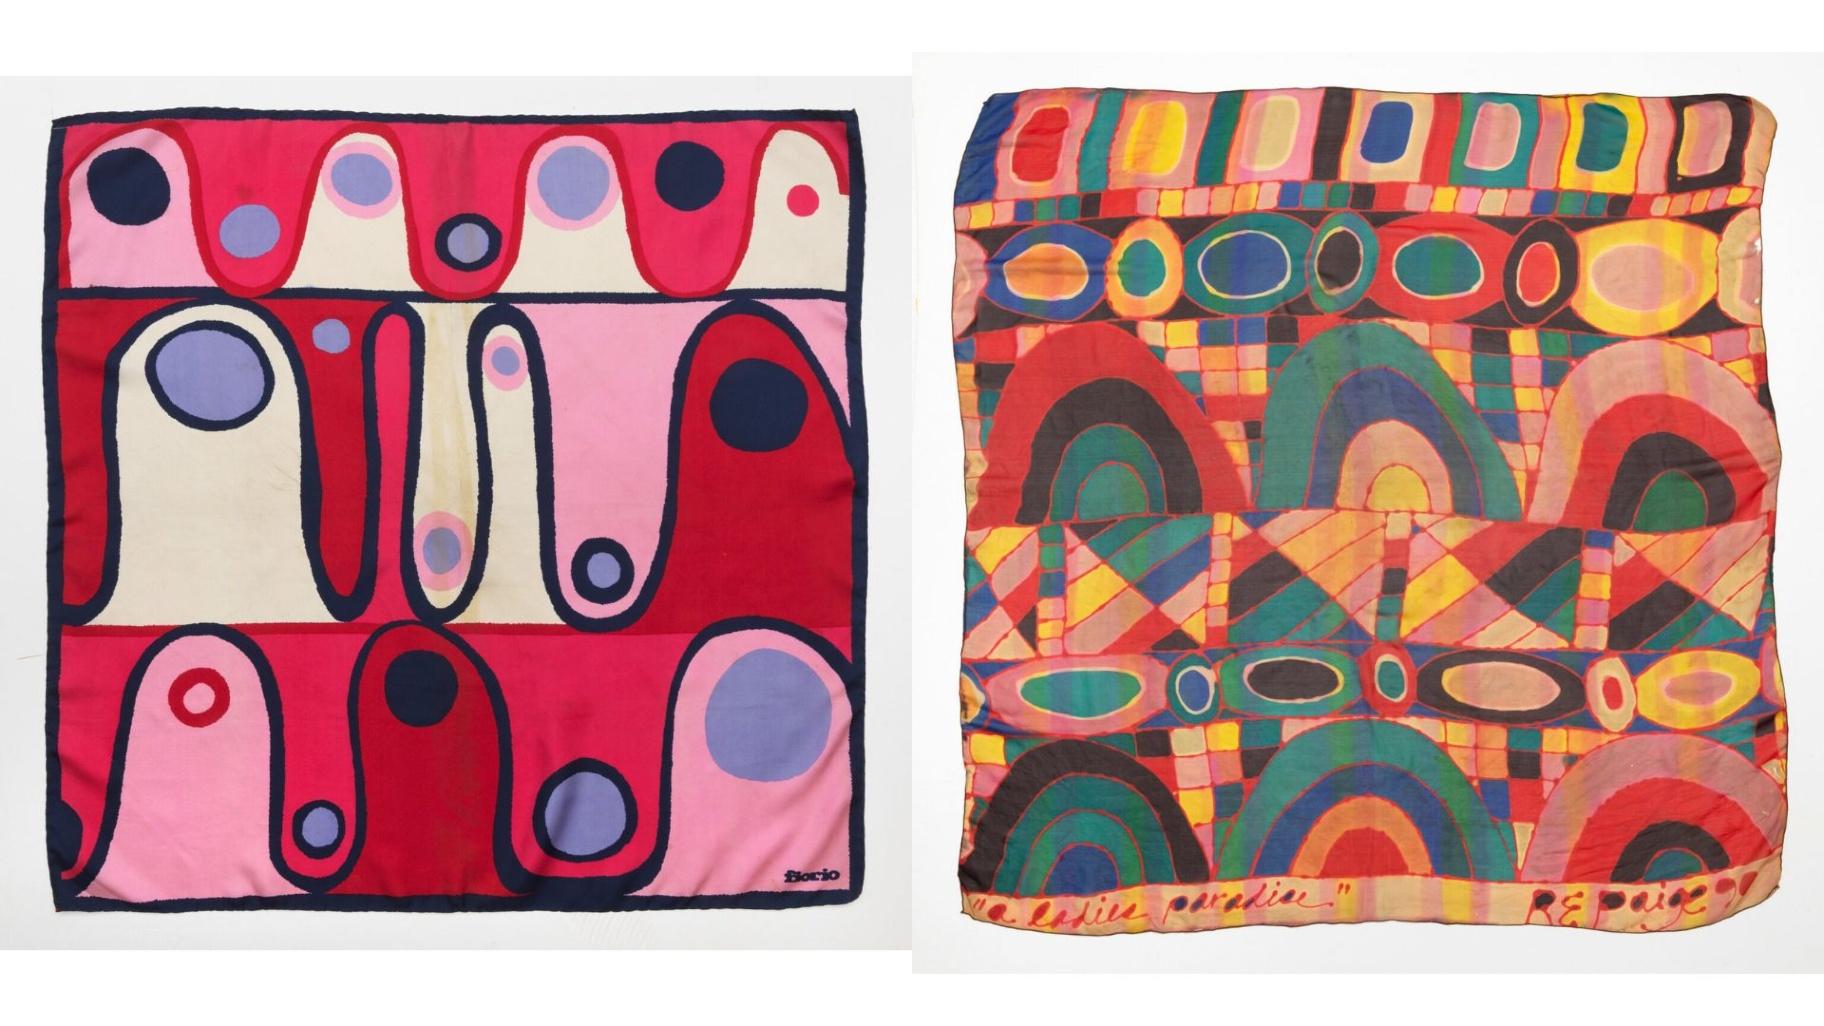 Left: Scarf silk screen print by Robert Earl Paige, 1964. Right: Hand-painted and dyed crepe de Chine silk by Robert Earl Paige, 1990. (Provided)